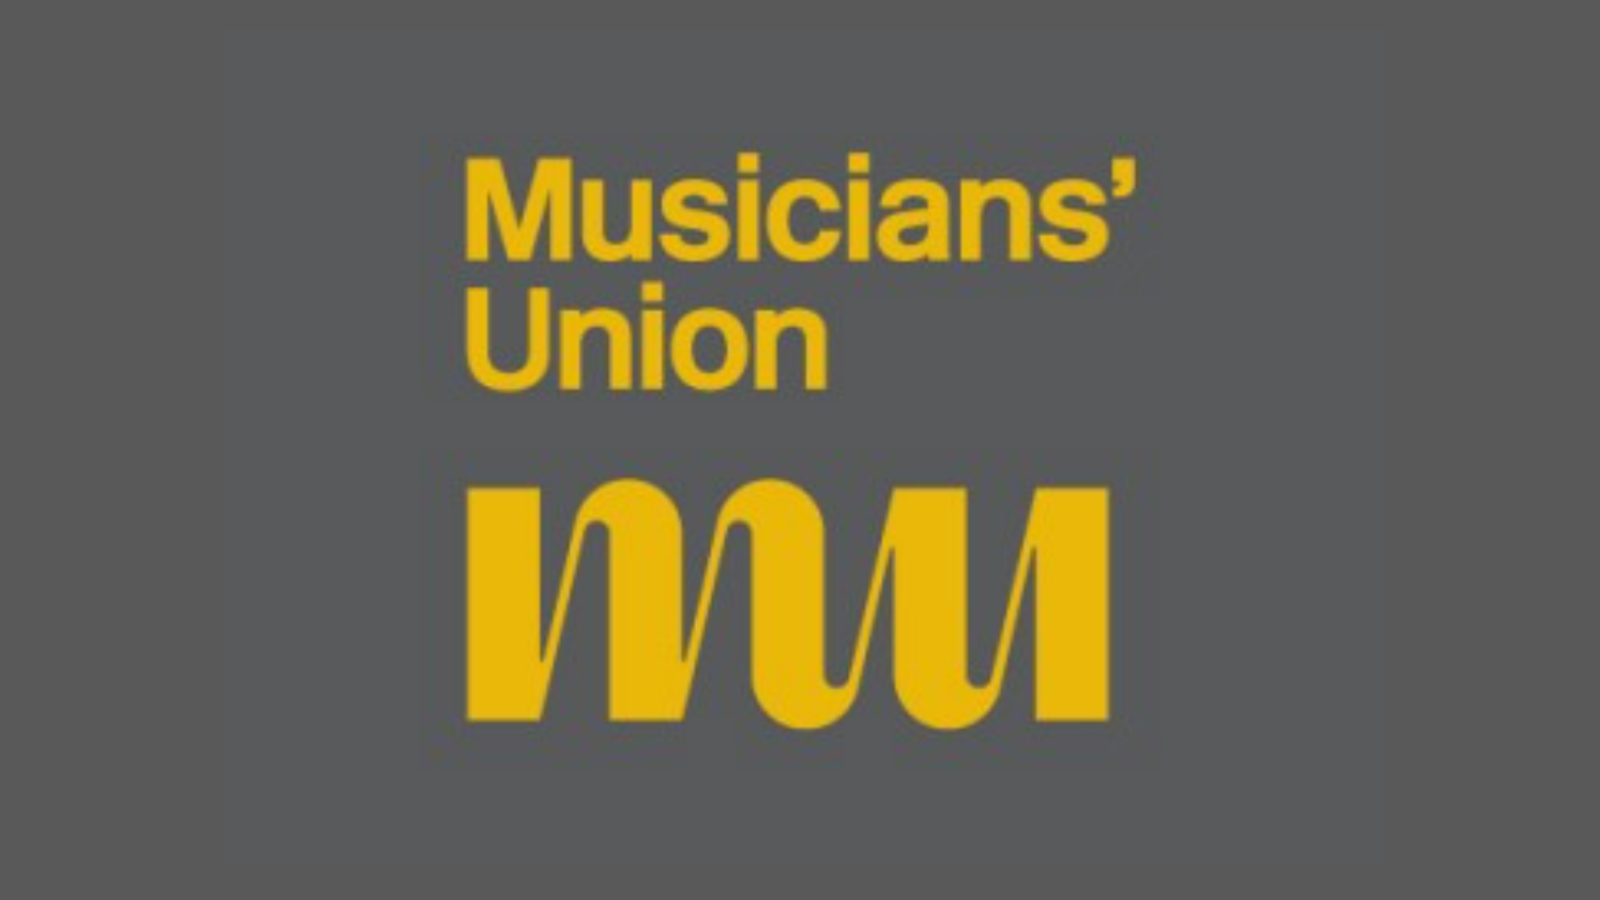 Dr Diljeet Kaur Bhachu elected to Musicians’ Union Executive Committee